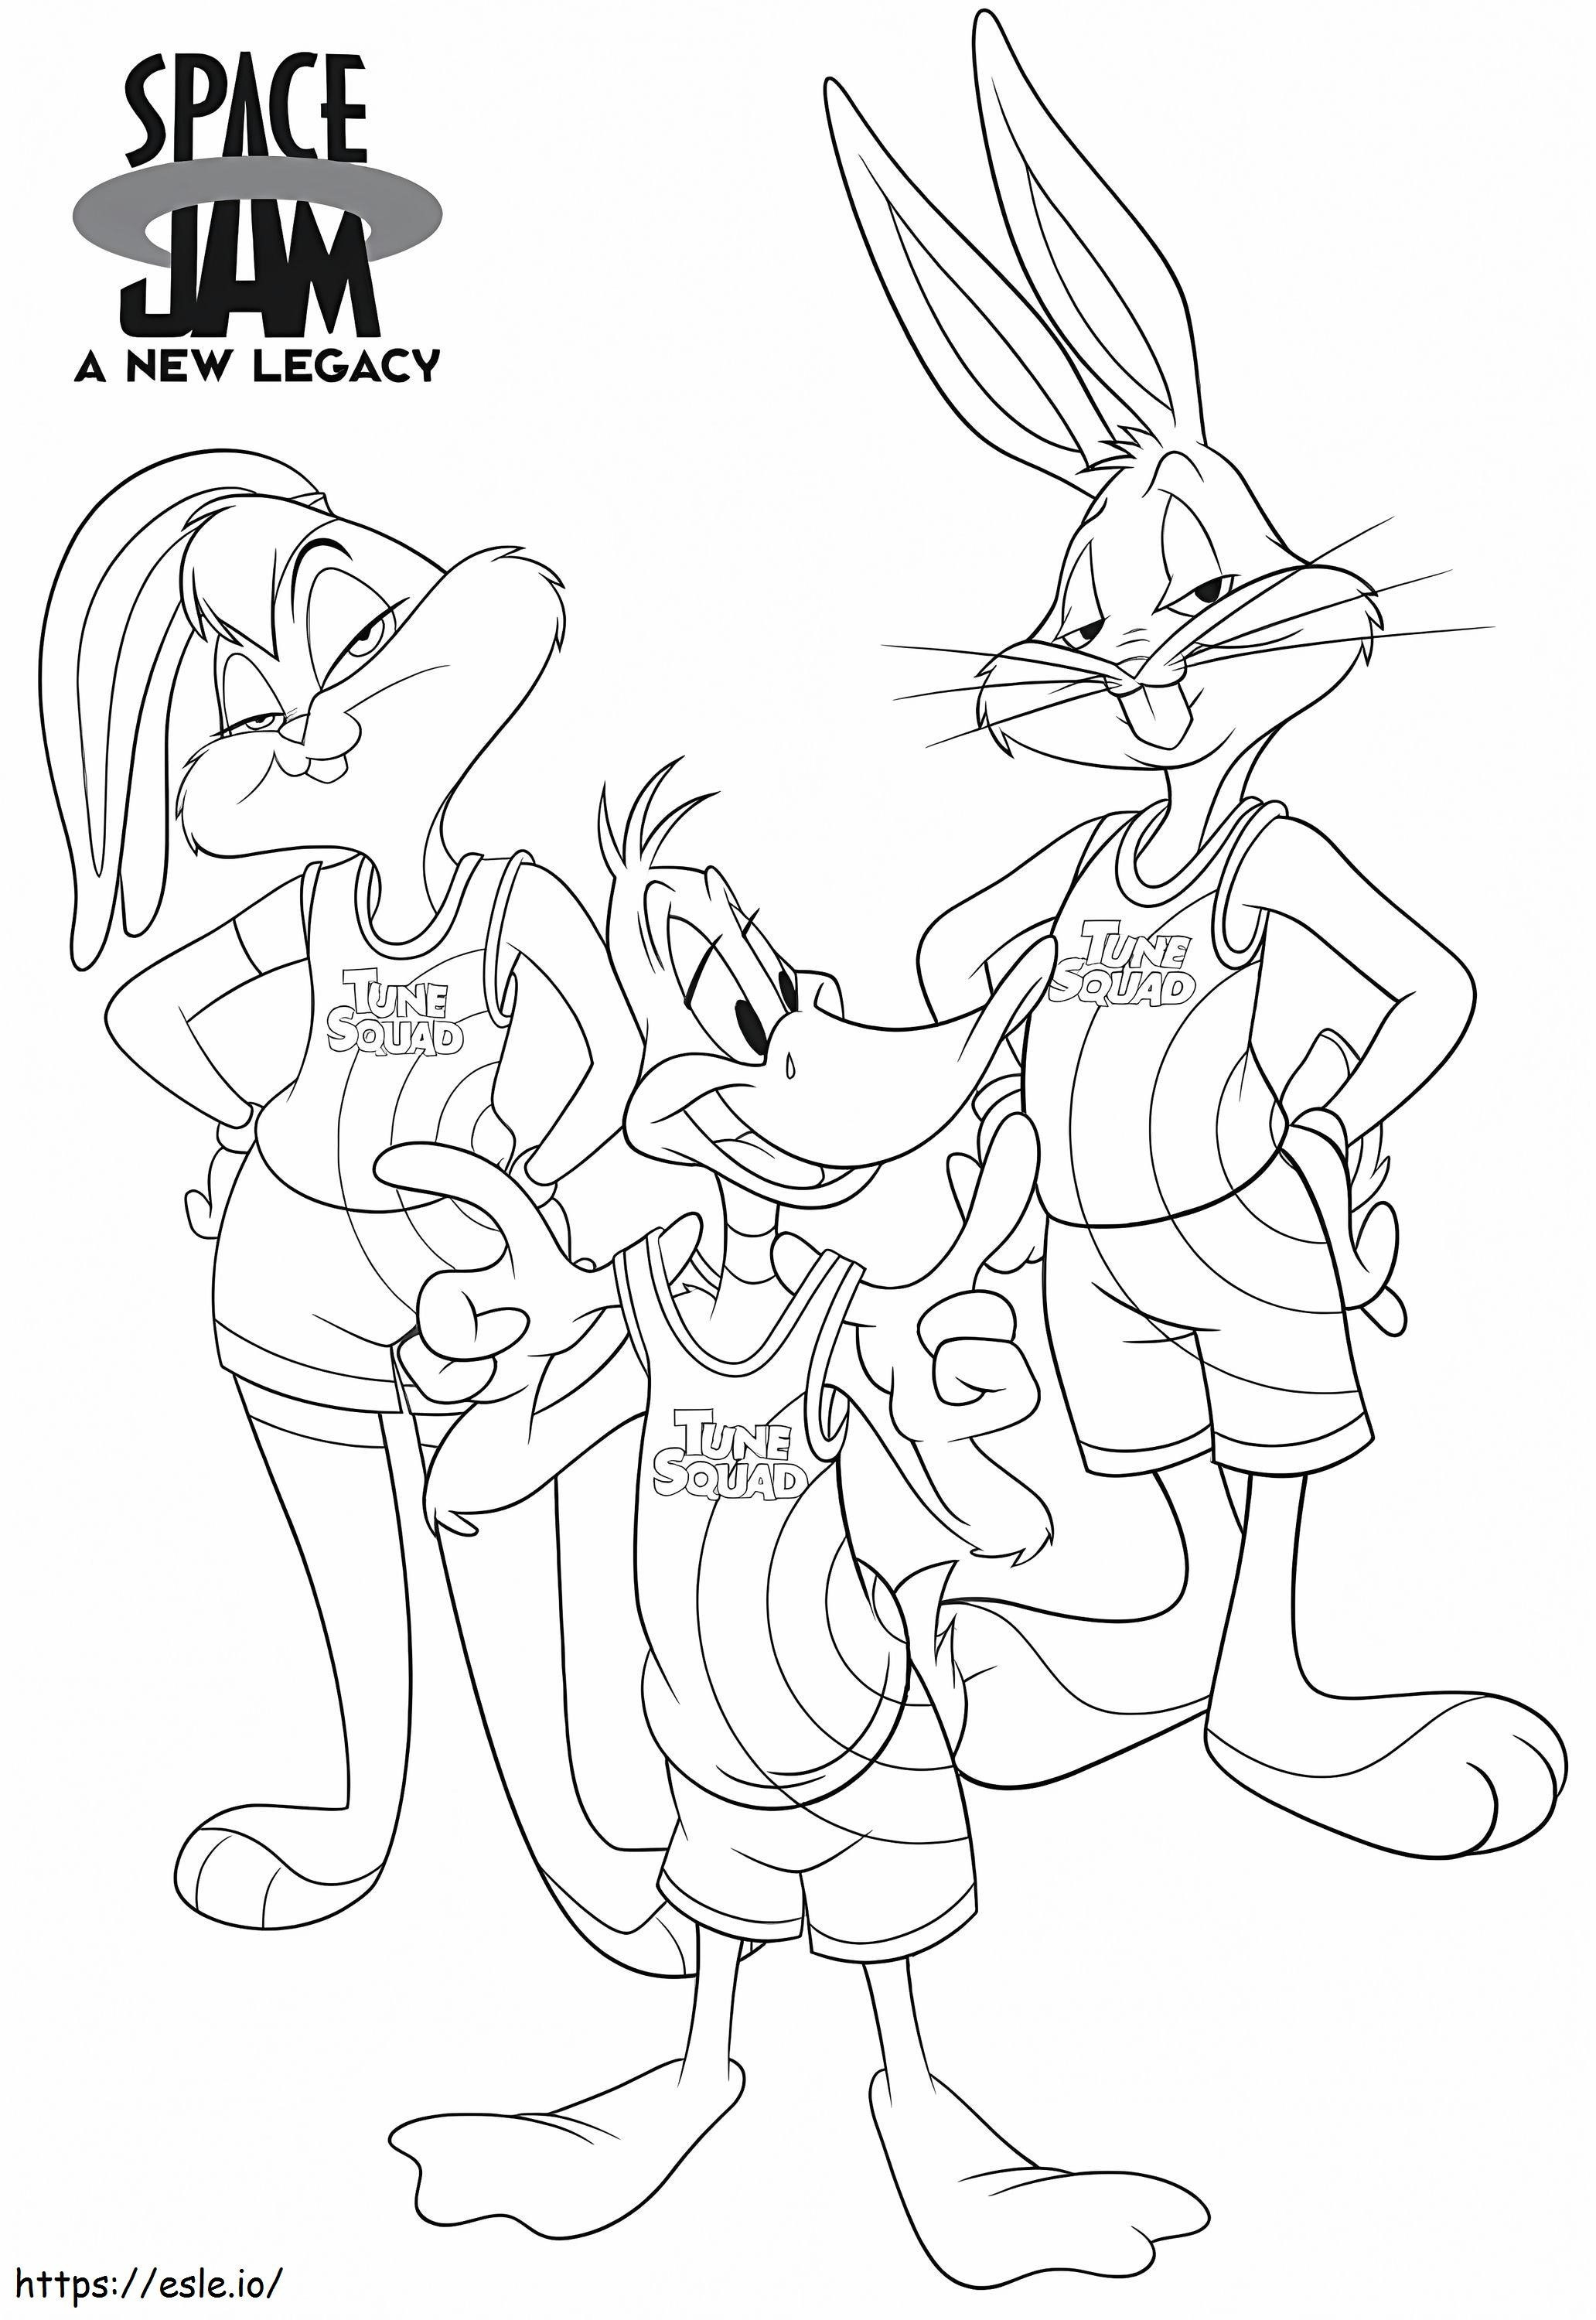 Space Jam 2 Looney Tunes coloring page